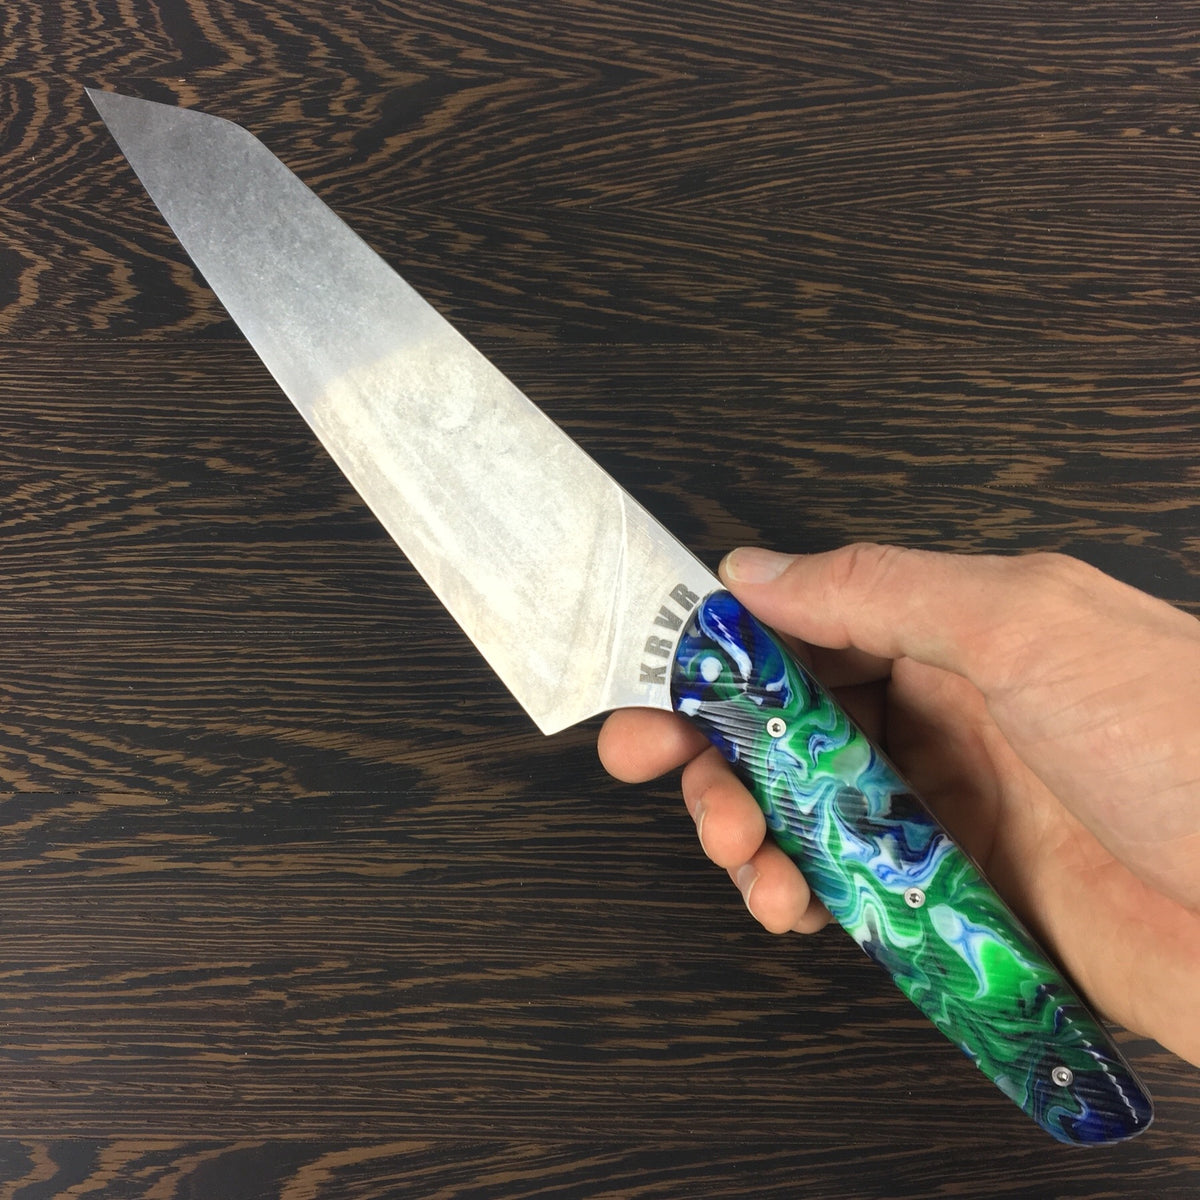 Lil’ Stormy - 7.6” Gyuto Chef Knife S35VN Stainless Steel